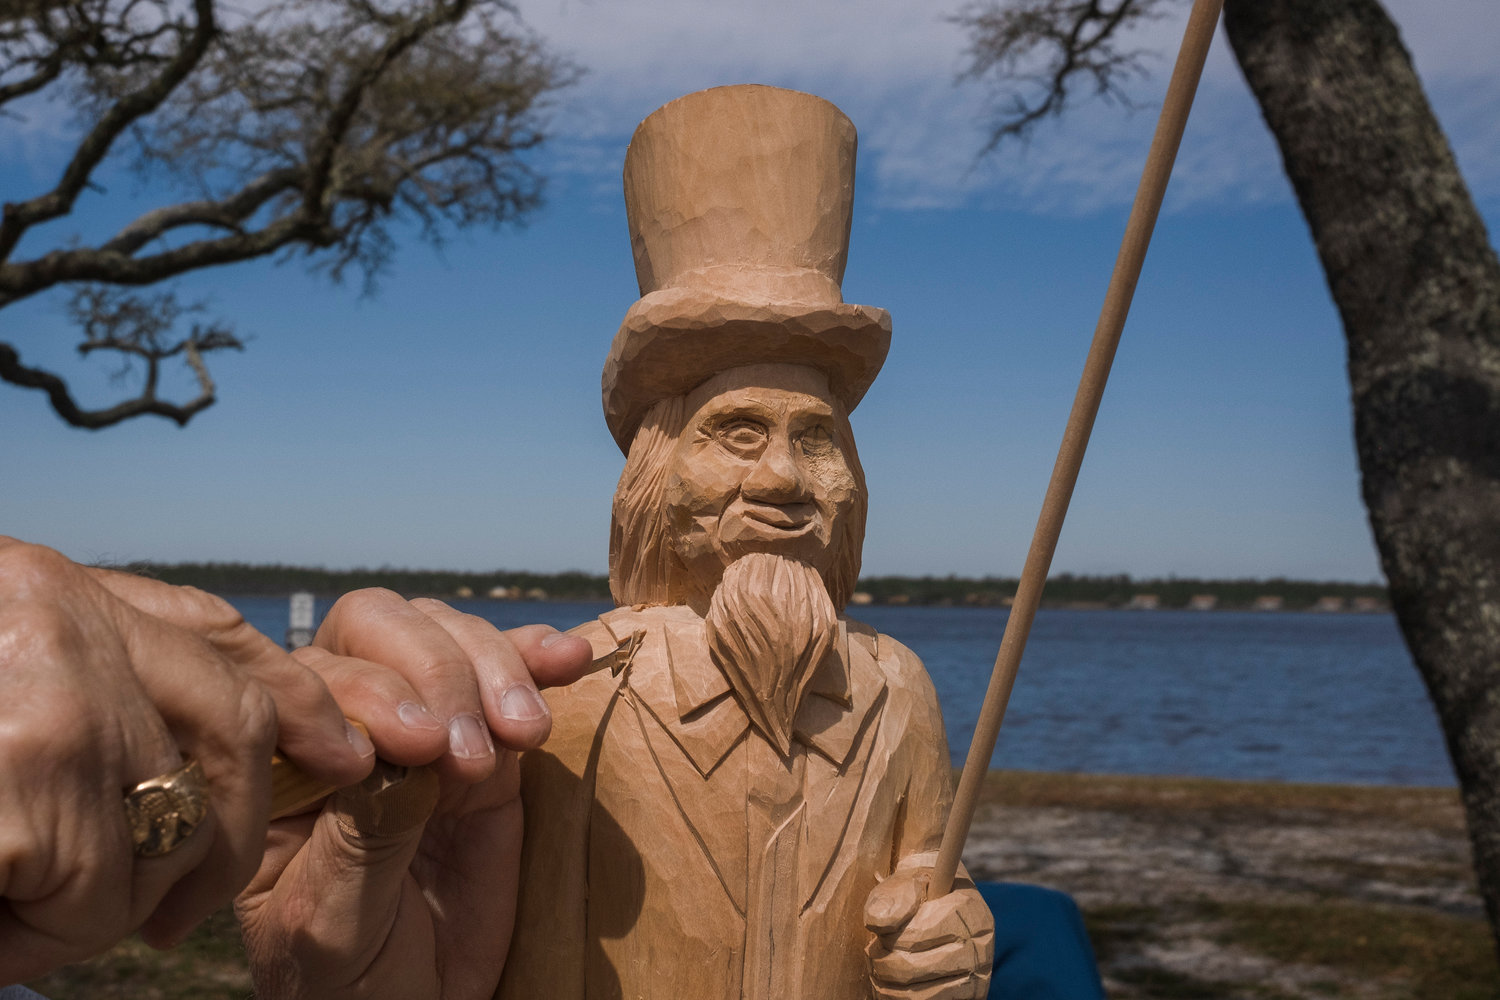 MICAH GREEN / GULF COAST MEDIA

Chip Smith, of Fairhope, works on a wood carving during Ballyhoo Festival at Gulf State Park on Saturday.